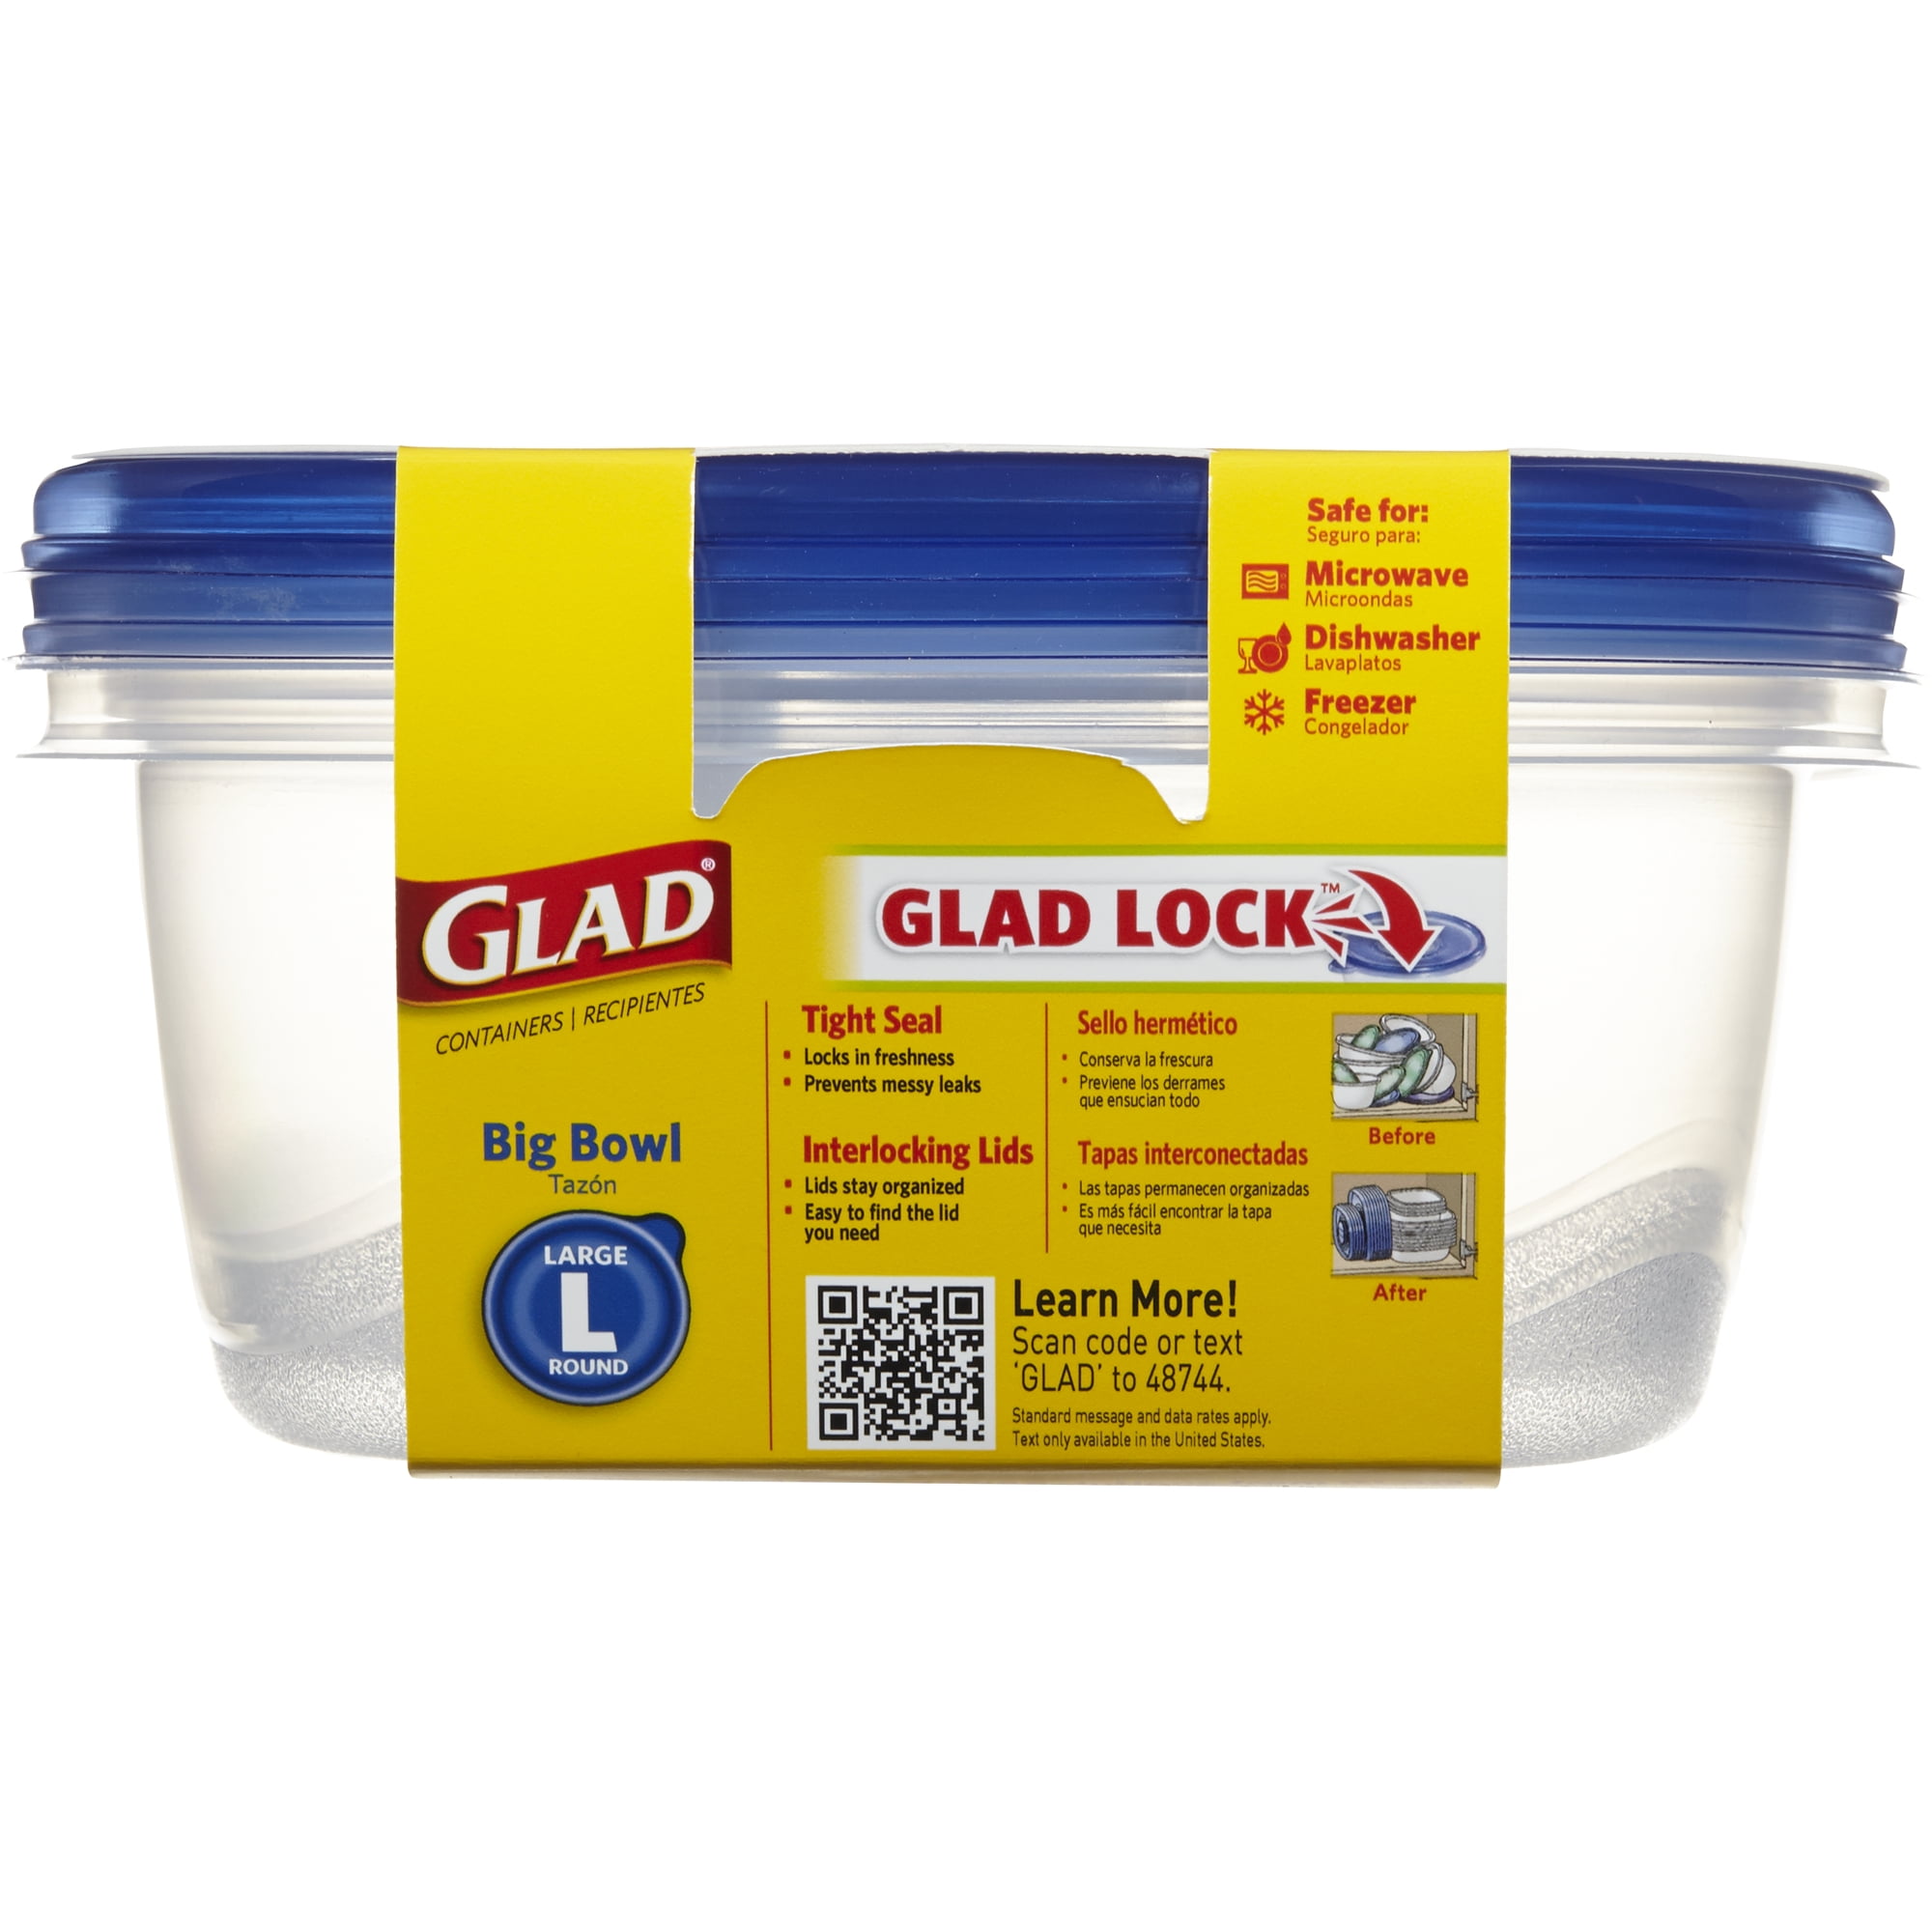 Glad Big Bowl Food Storage Containers with Lids, 48 oz, Clear/Blue,  Plastic, 3/Box